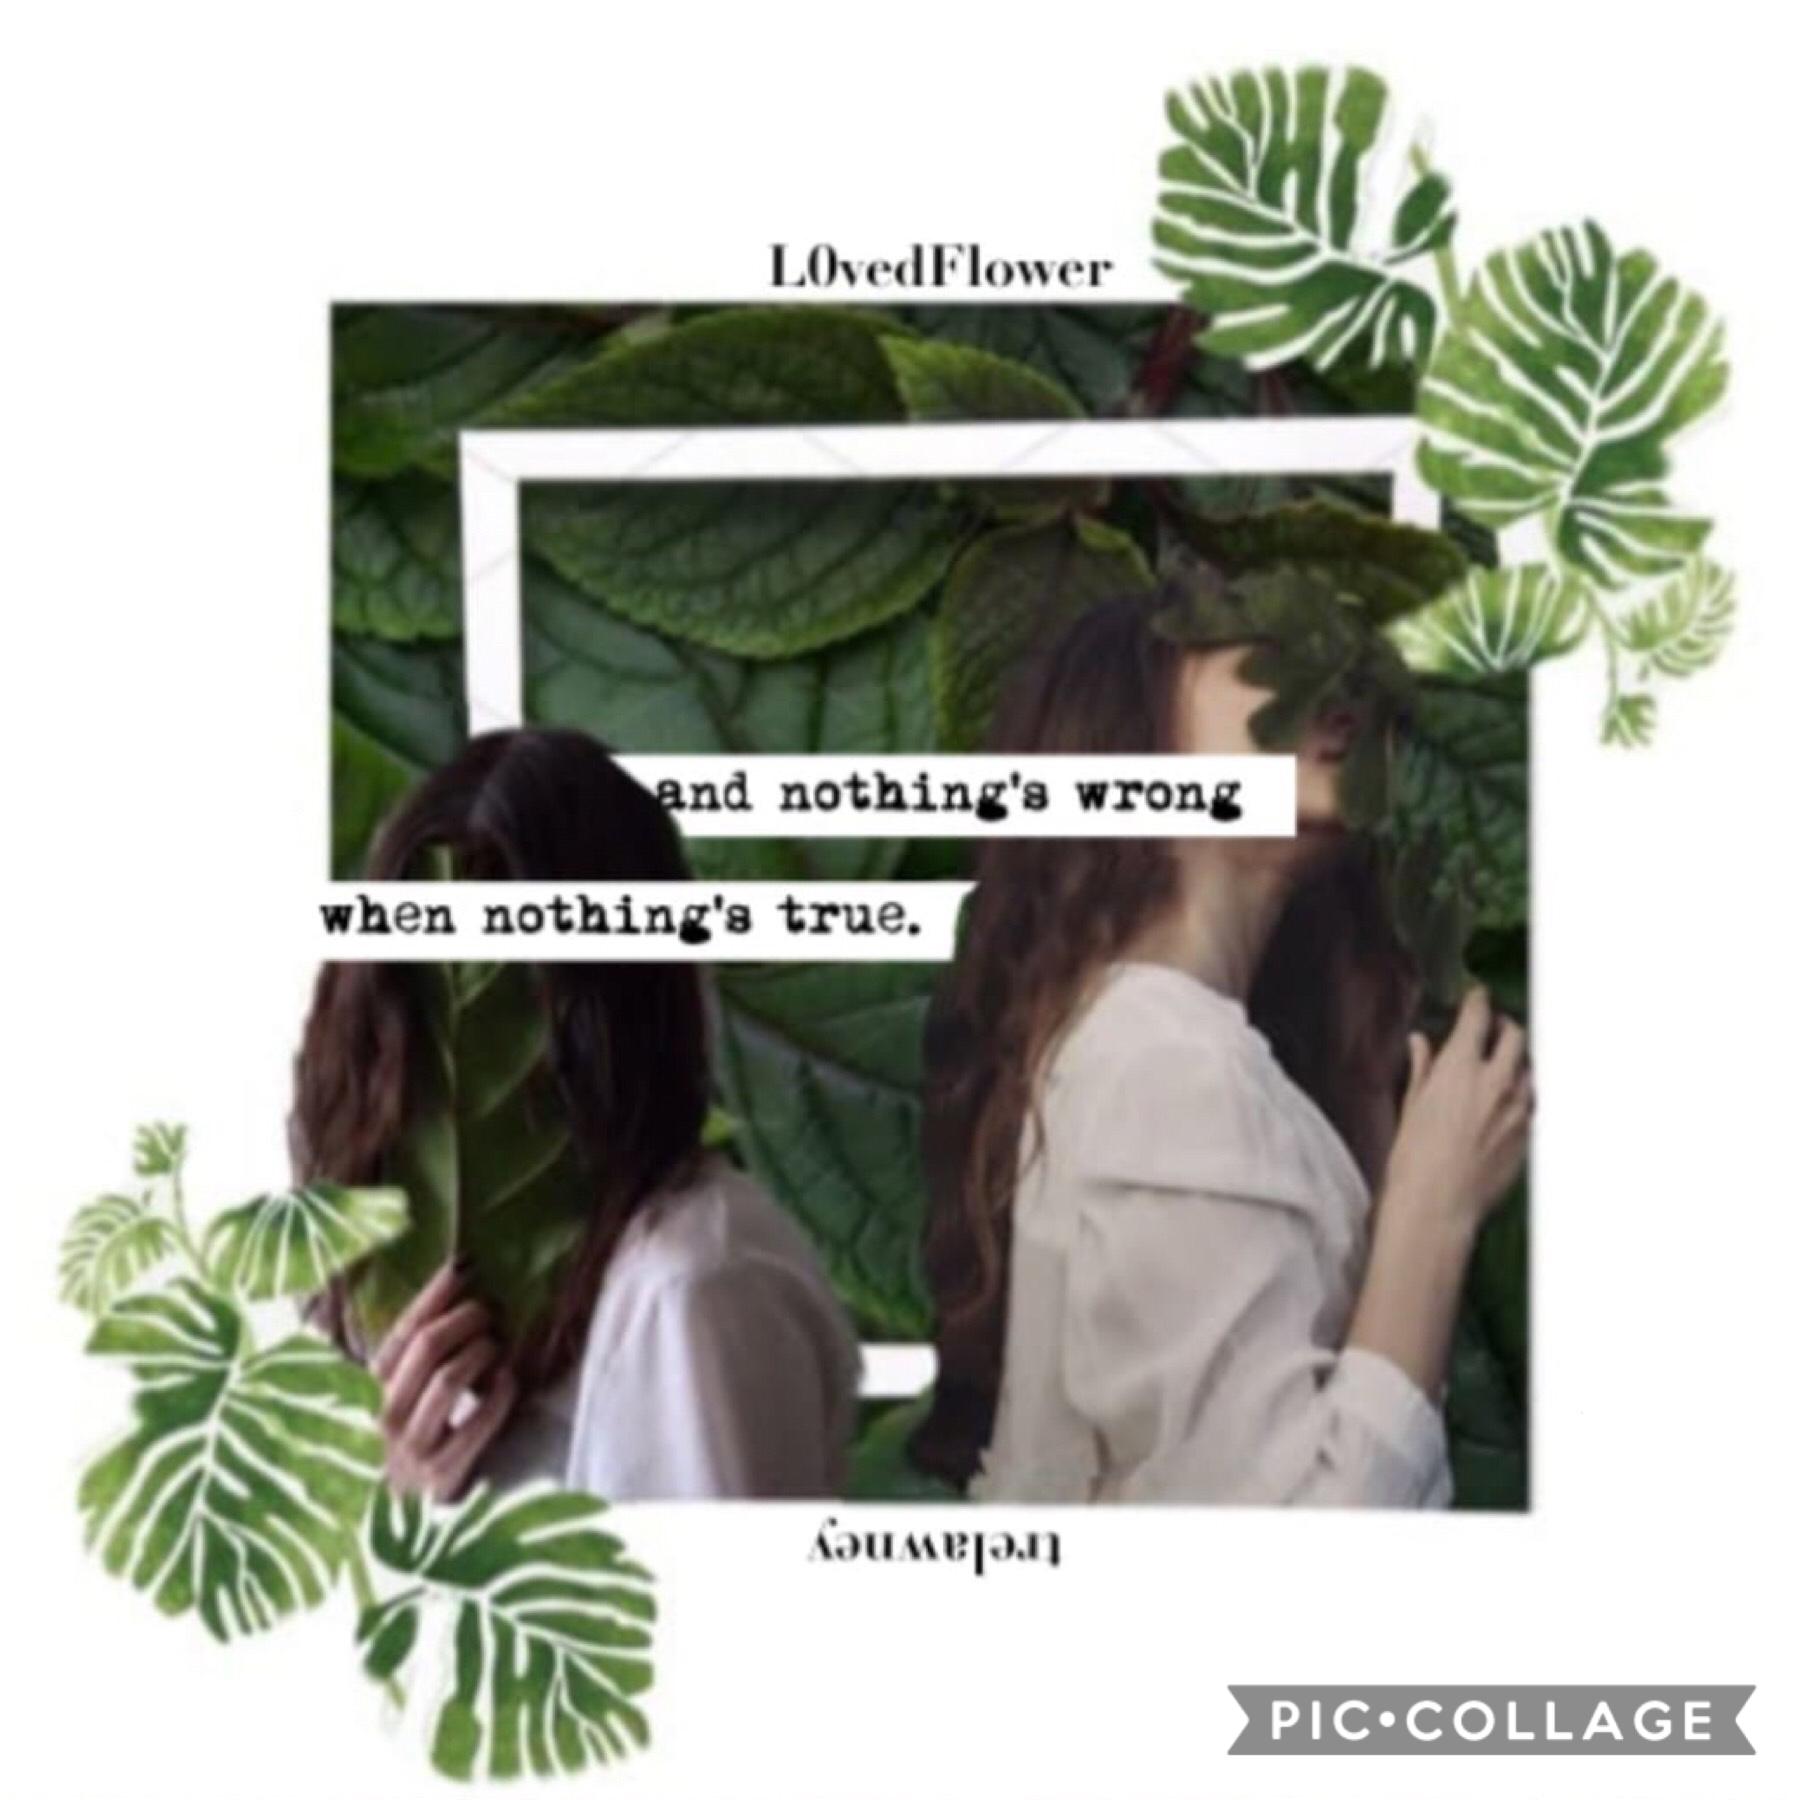 ✰ [click] ✰ 
✰ Collab with the amazing trelawney ✰
✰ I did the background and they did the text ✰
✰ check out their account! / they are soo talented!! ✰